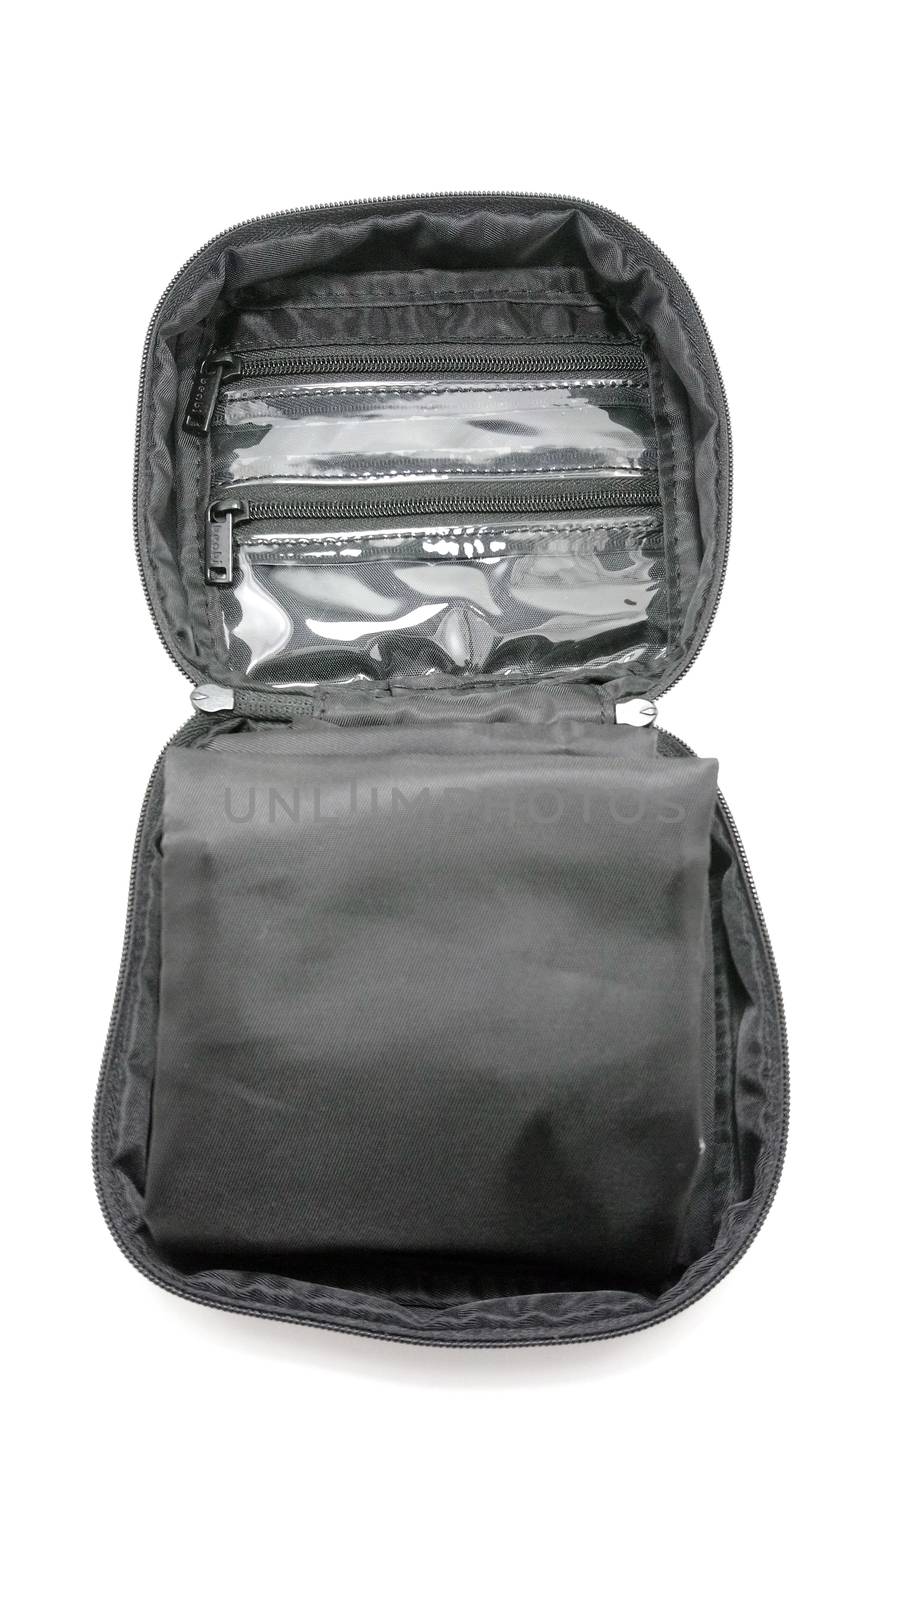 Black portable toiletries travel organizer use to put items like toothbrush,toothpaste, soap, and others